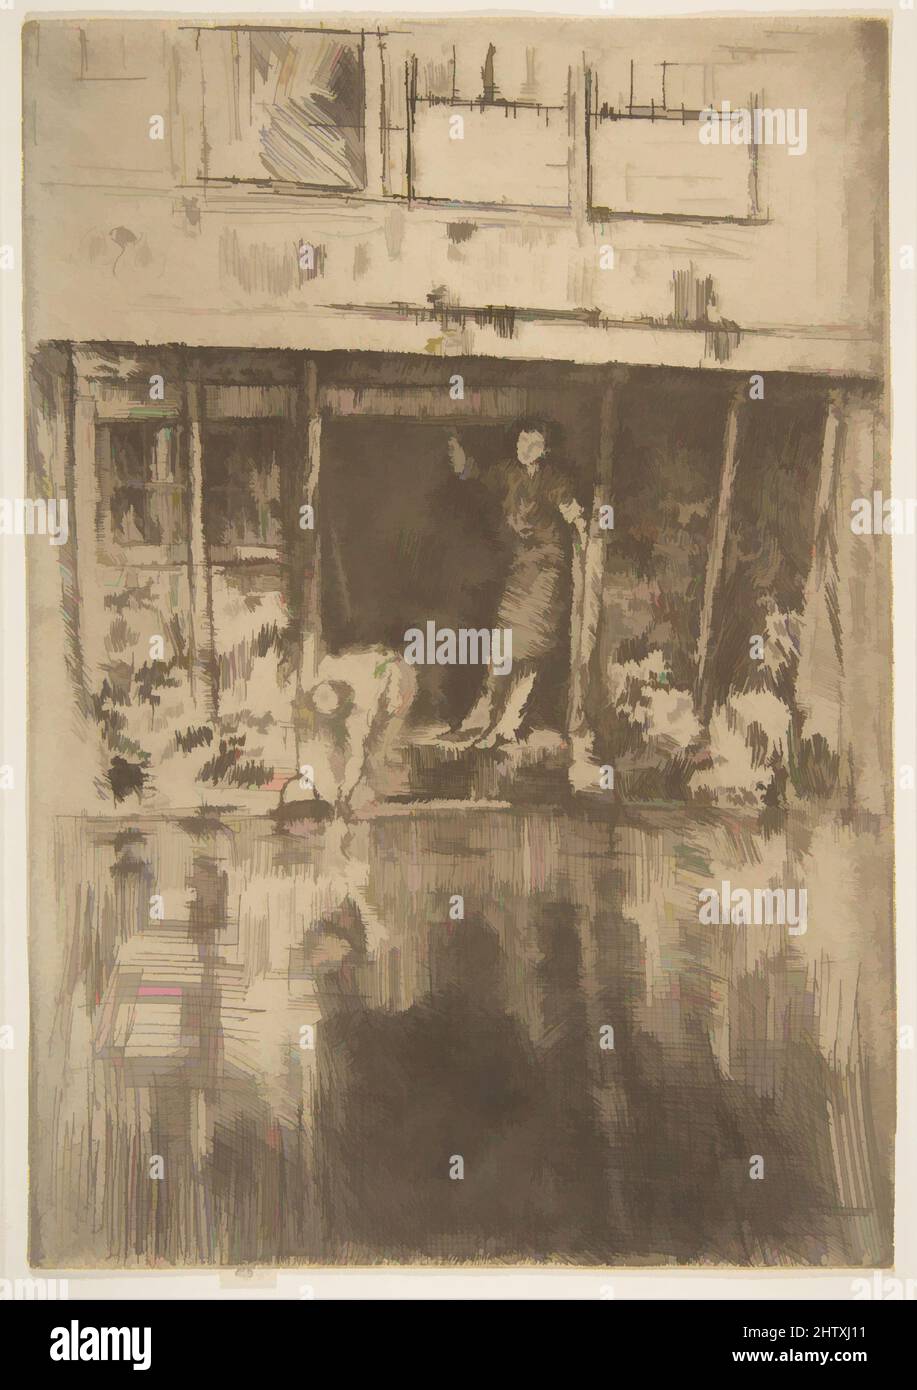 Art inspired by Pierrot, 1889, Etching and drypoint; sixth state of eight (Glasgow); printed in dark brown ink on medium weight ivory laid paper, Plate: 9 1/8 × 6 1/4 in. (23.1 × 15.9 cm), Prints, James McNeill Whistler (American, Lowell, Massachusetts 1834–1903 London), In an old, Classic works modernized by Artotop with a splash of modernity. Shapes, color and value, eye-catching visual impact on art. Emotions through freedom of artworks in a contemporary way. A timeless message pursuing a wildly creative new direction. Artists turning to the digital medium and creating the Artotop NFT Stock Photo